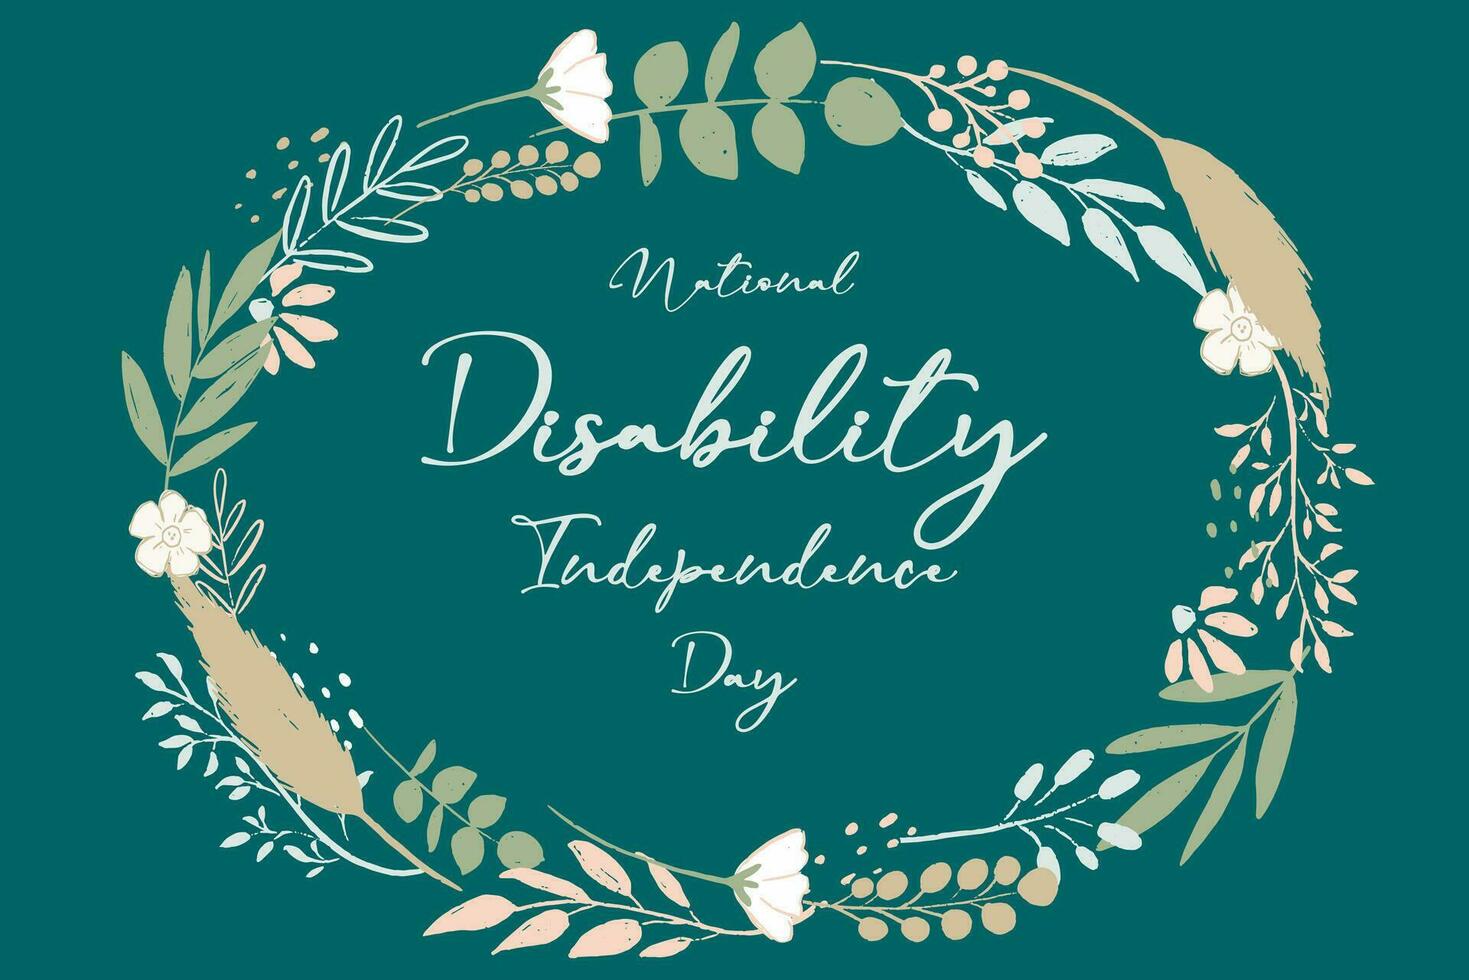 National Disability Independence Day vector